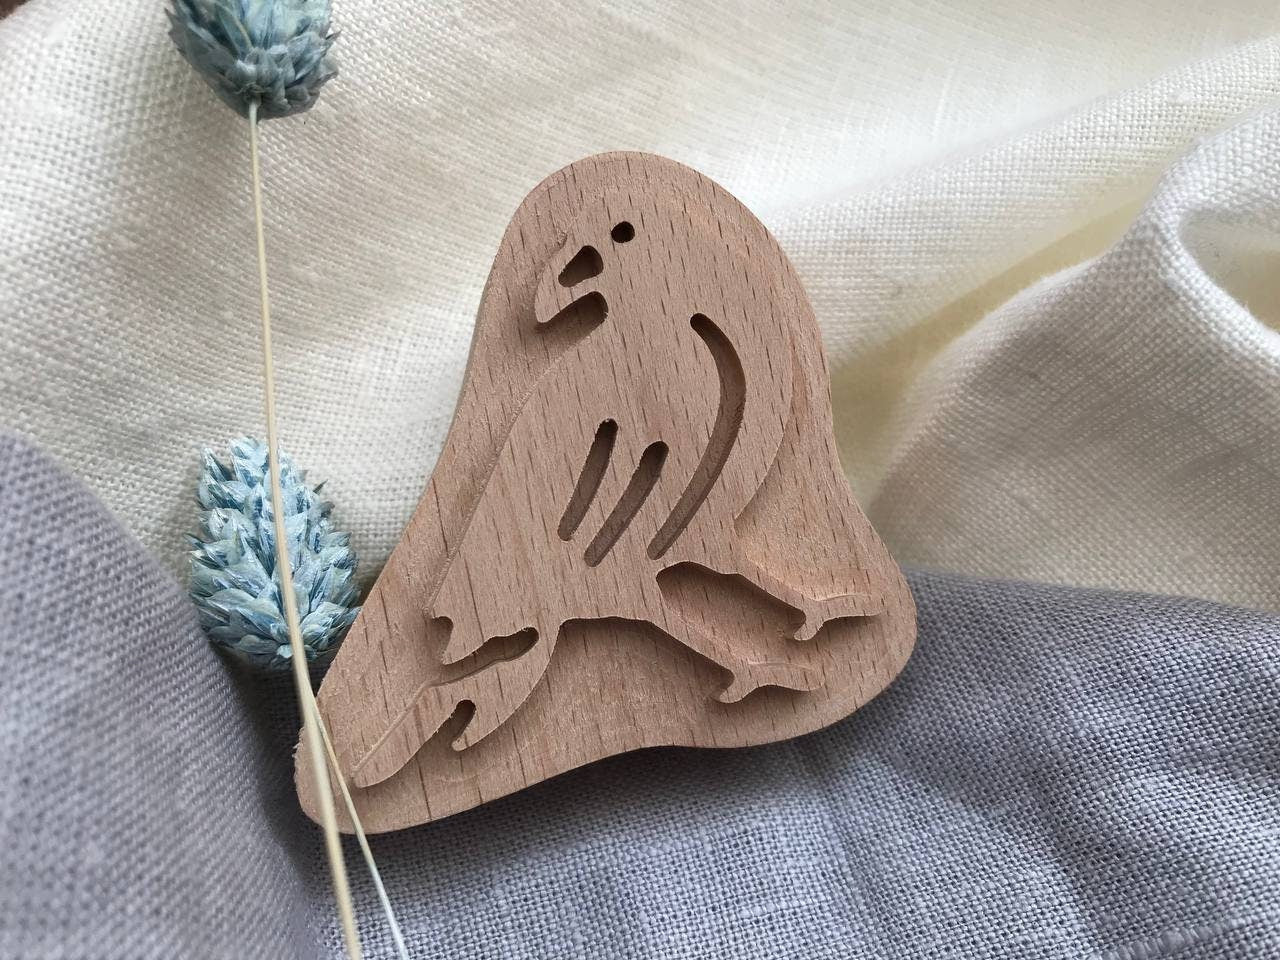 Raven stamp, wooden clay stamp, soap stamp, wooden stamp, fabric stamp